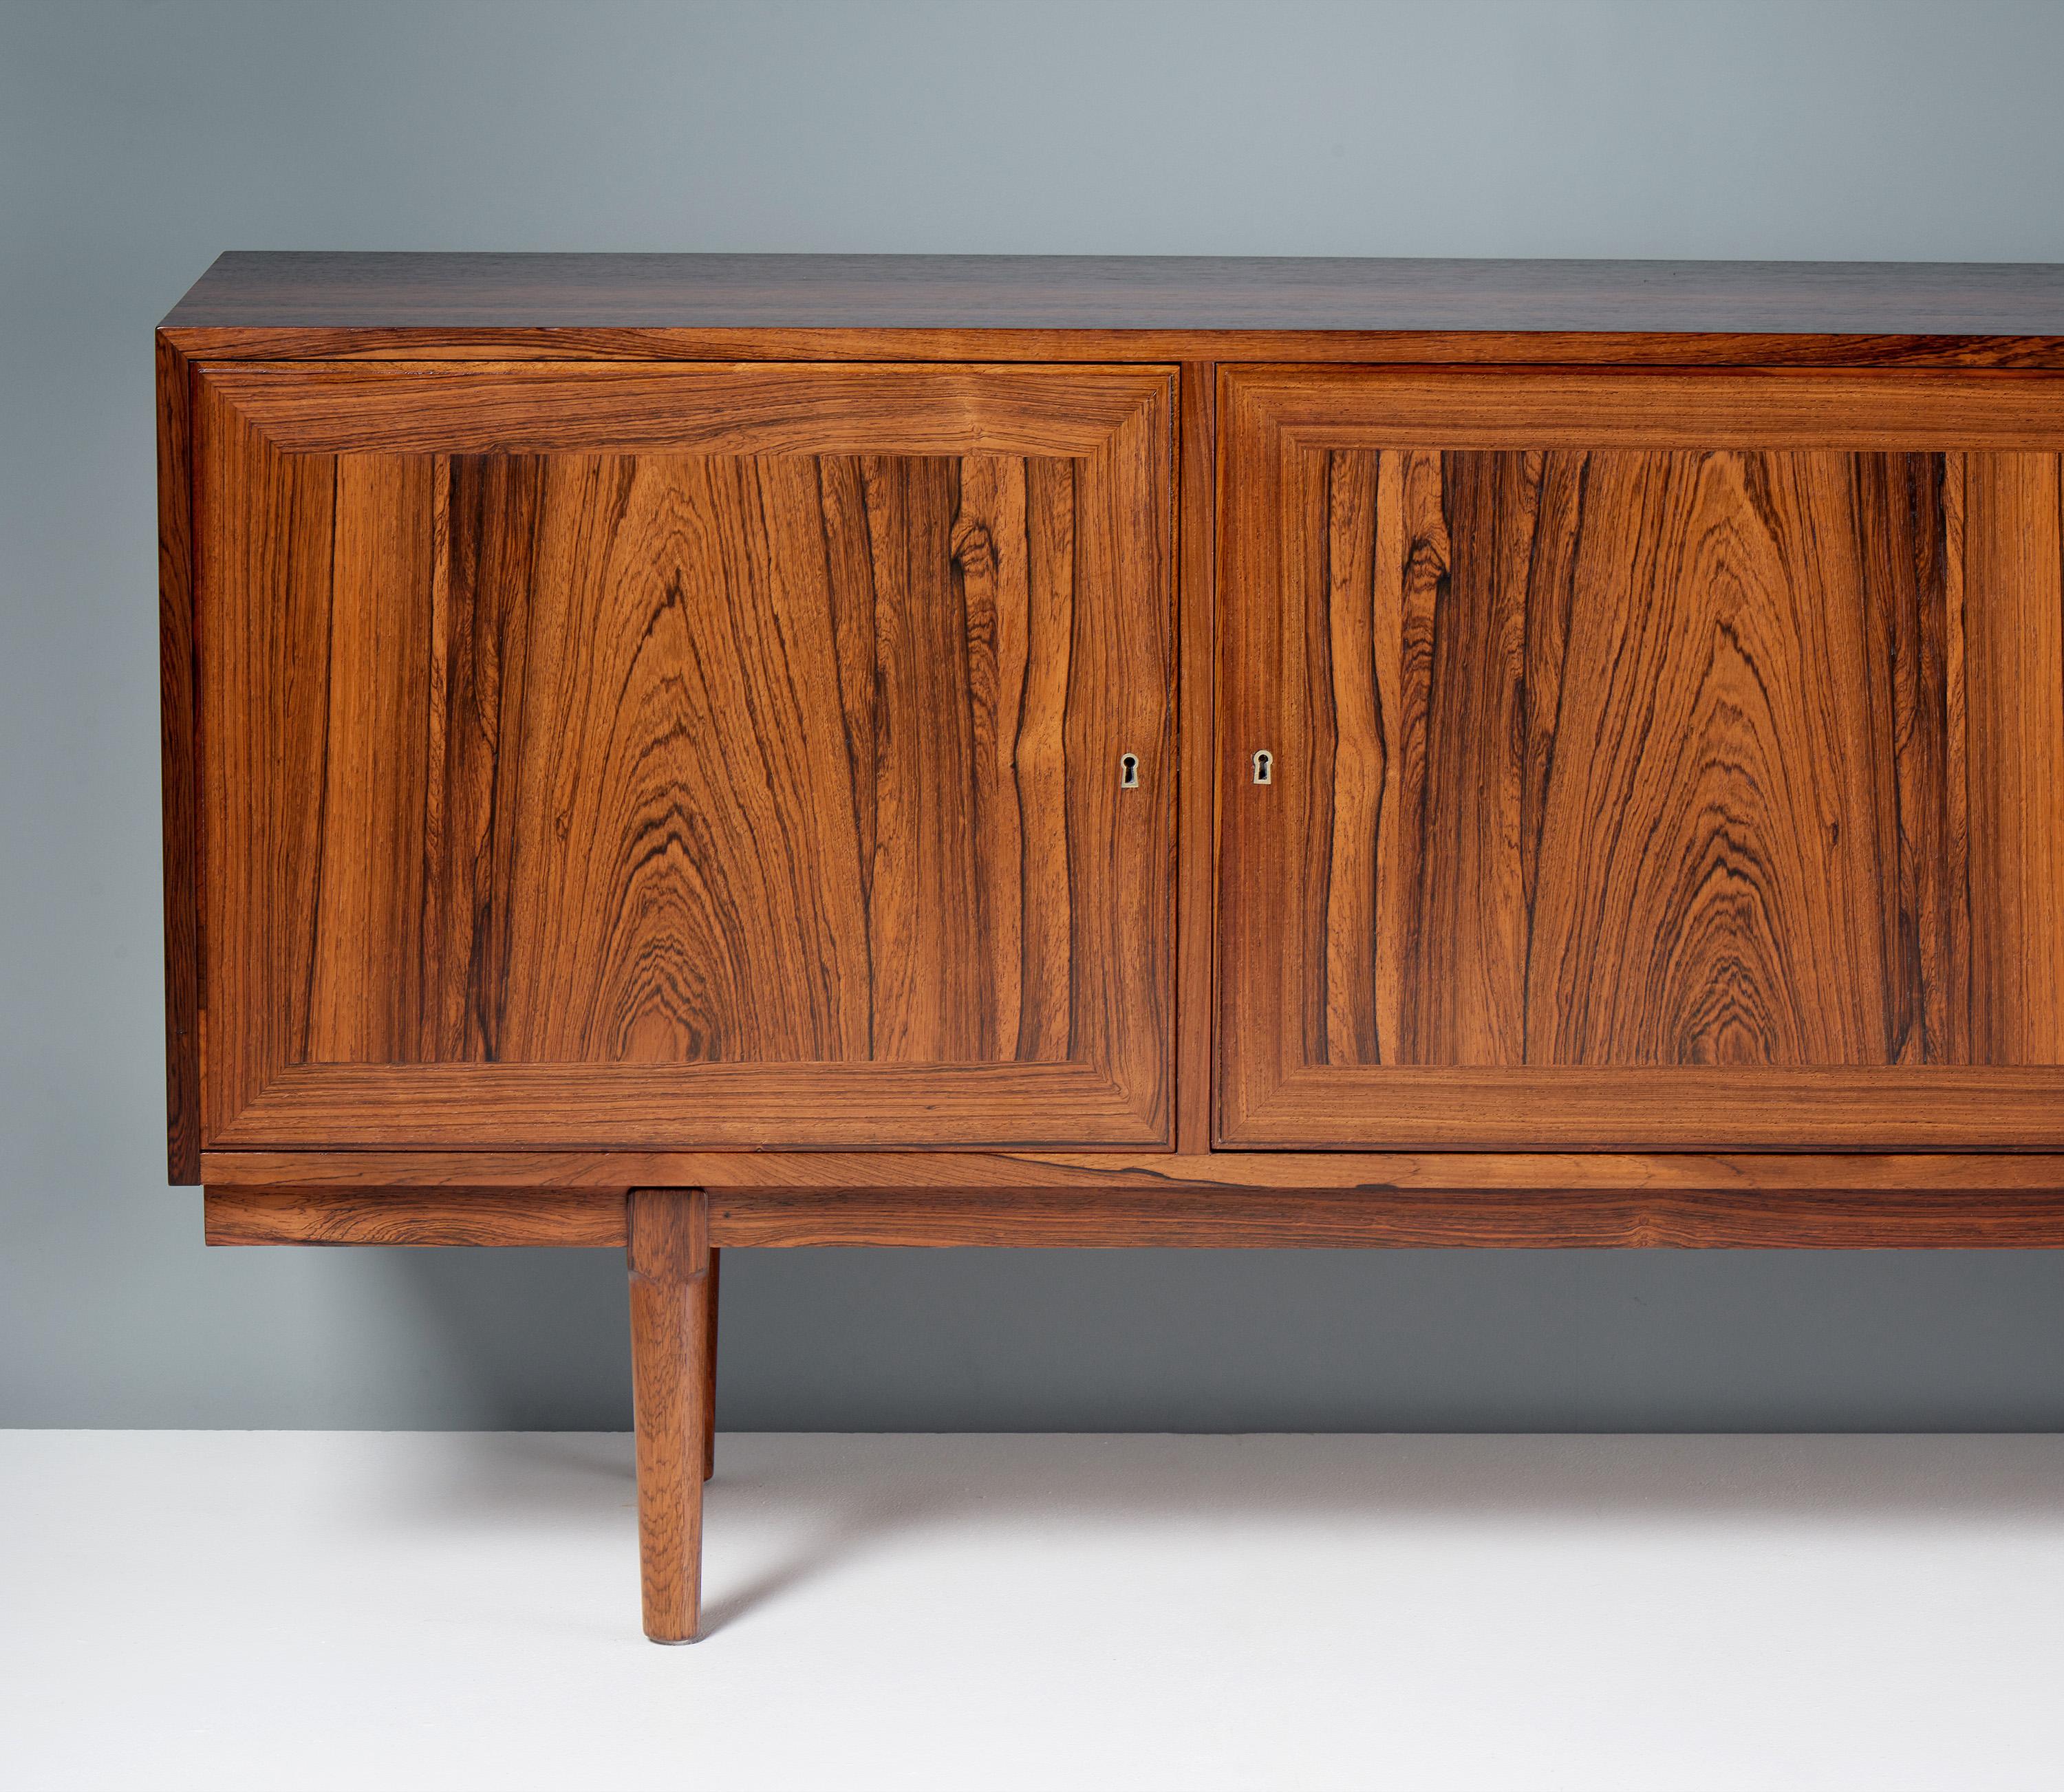 Rarely seen long credenza/sideboard with 4 lockable doors designed by Arne Vodder for Vamo Møbelfabrik, in Sønderborg, Denmark. This exceptional and rare sideboard was produced using the very finest rosewood stock. The frame and legs are solid